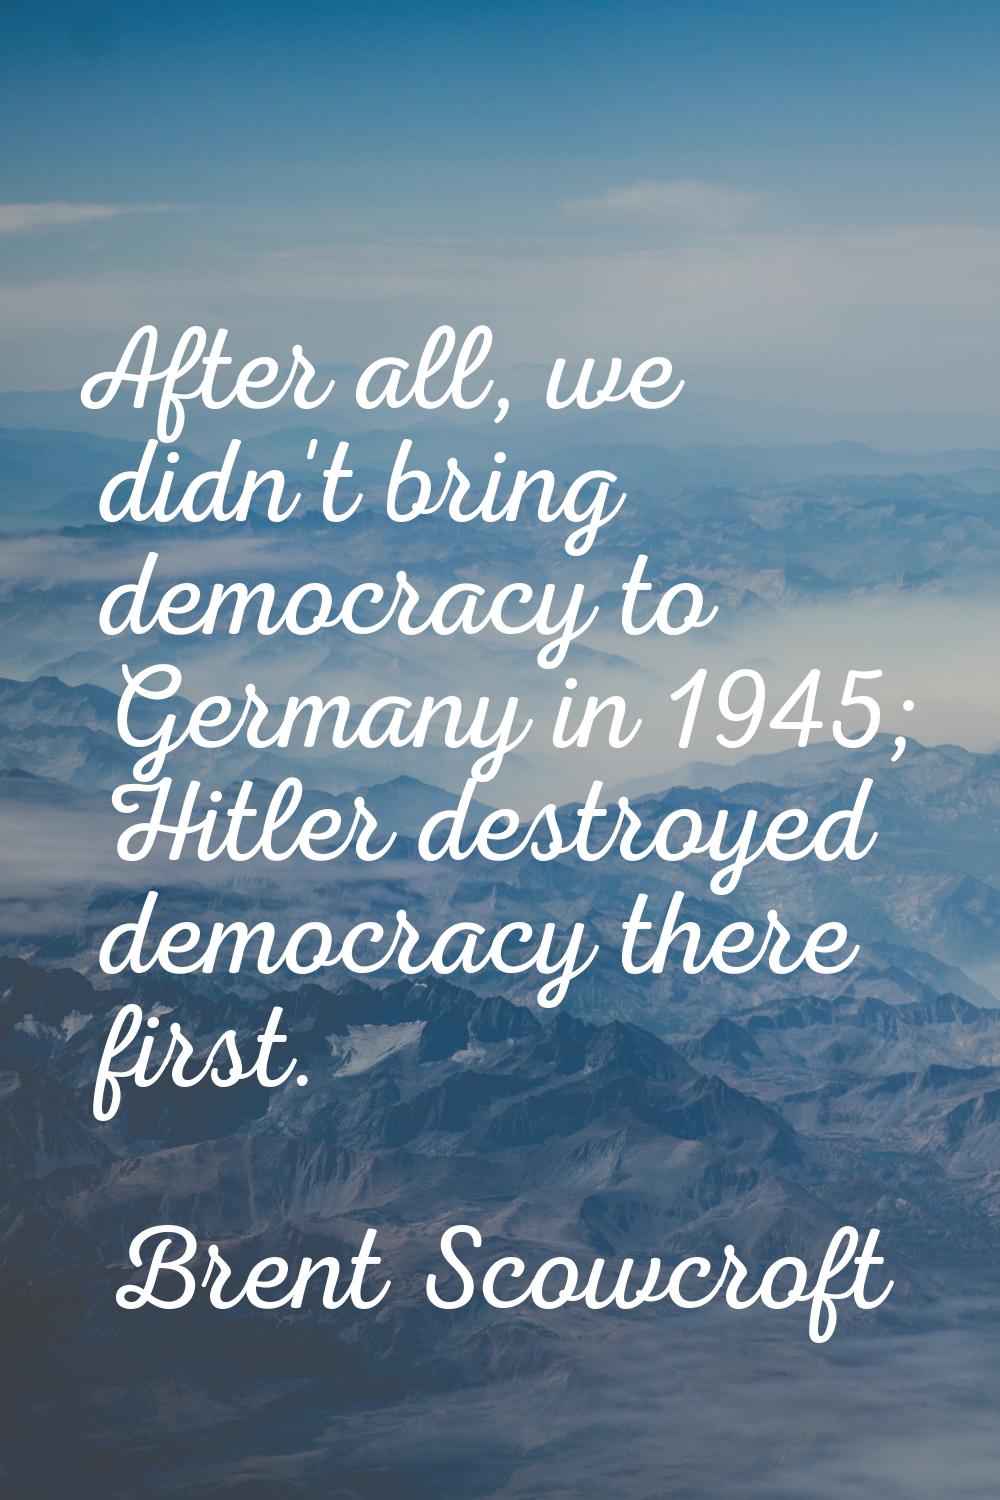 After all, we didn't bring democracy to Germany in 1945; Hitler destroyed democracy there first.